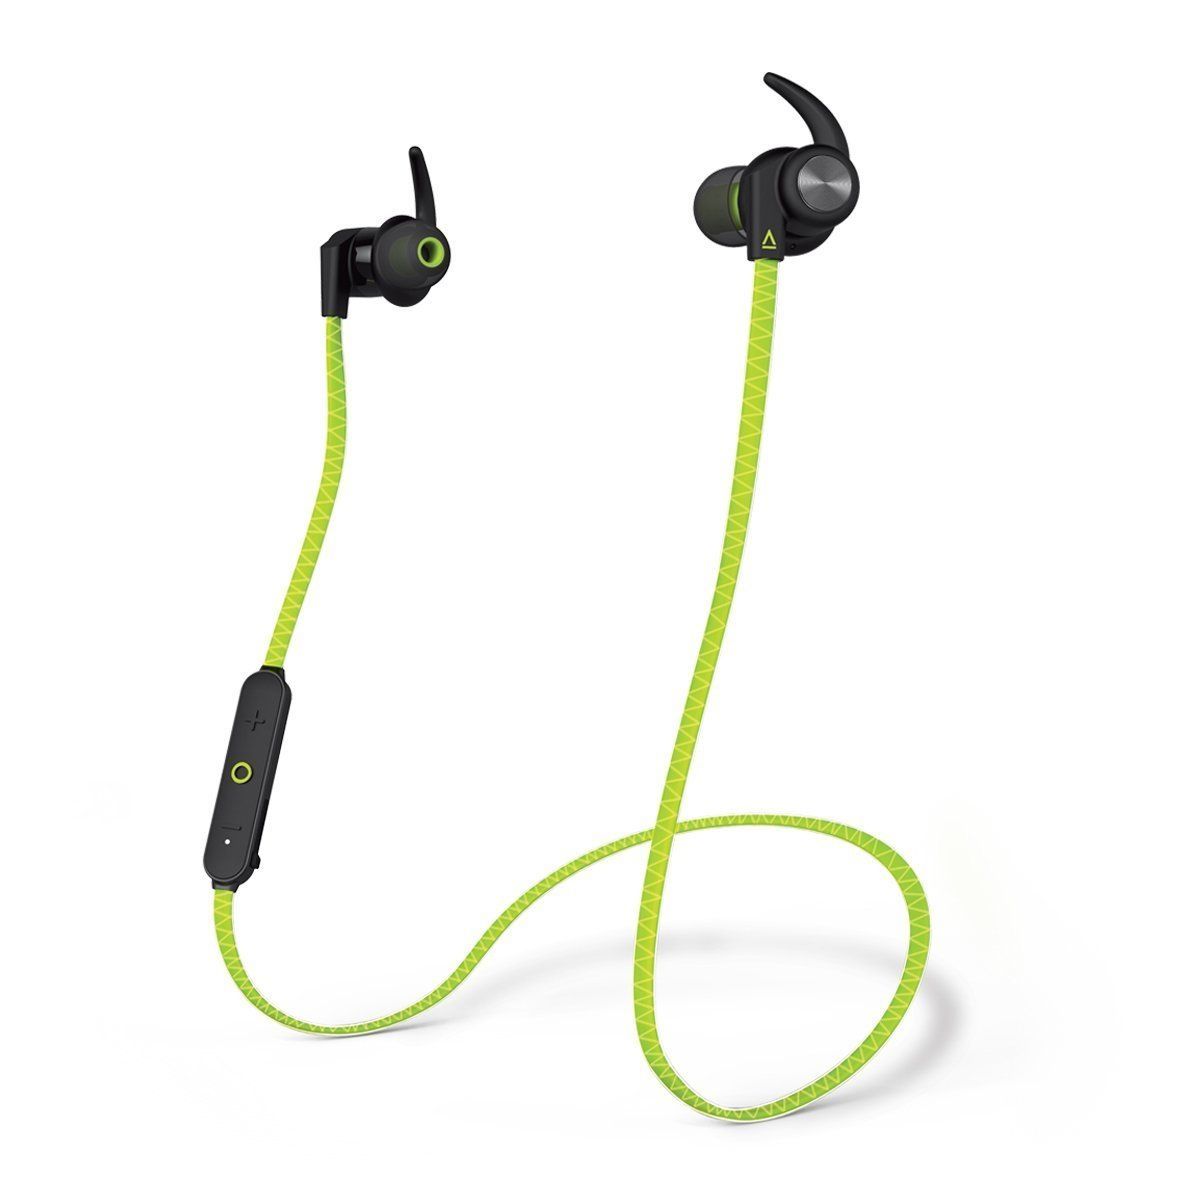 Creative labs headset outlier sports green